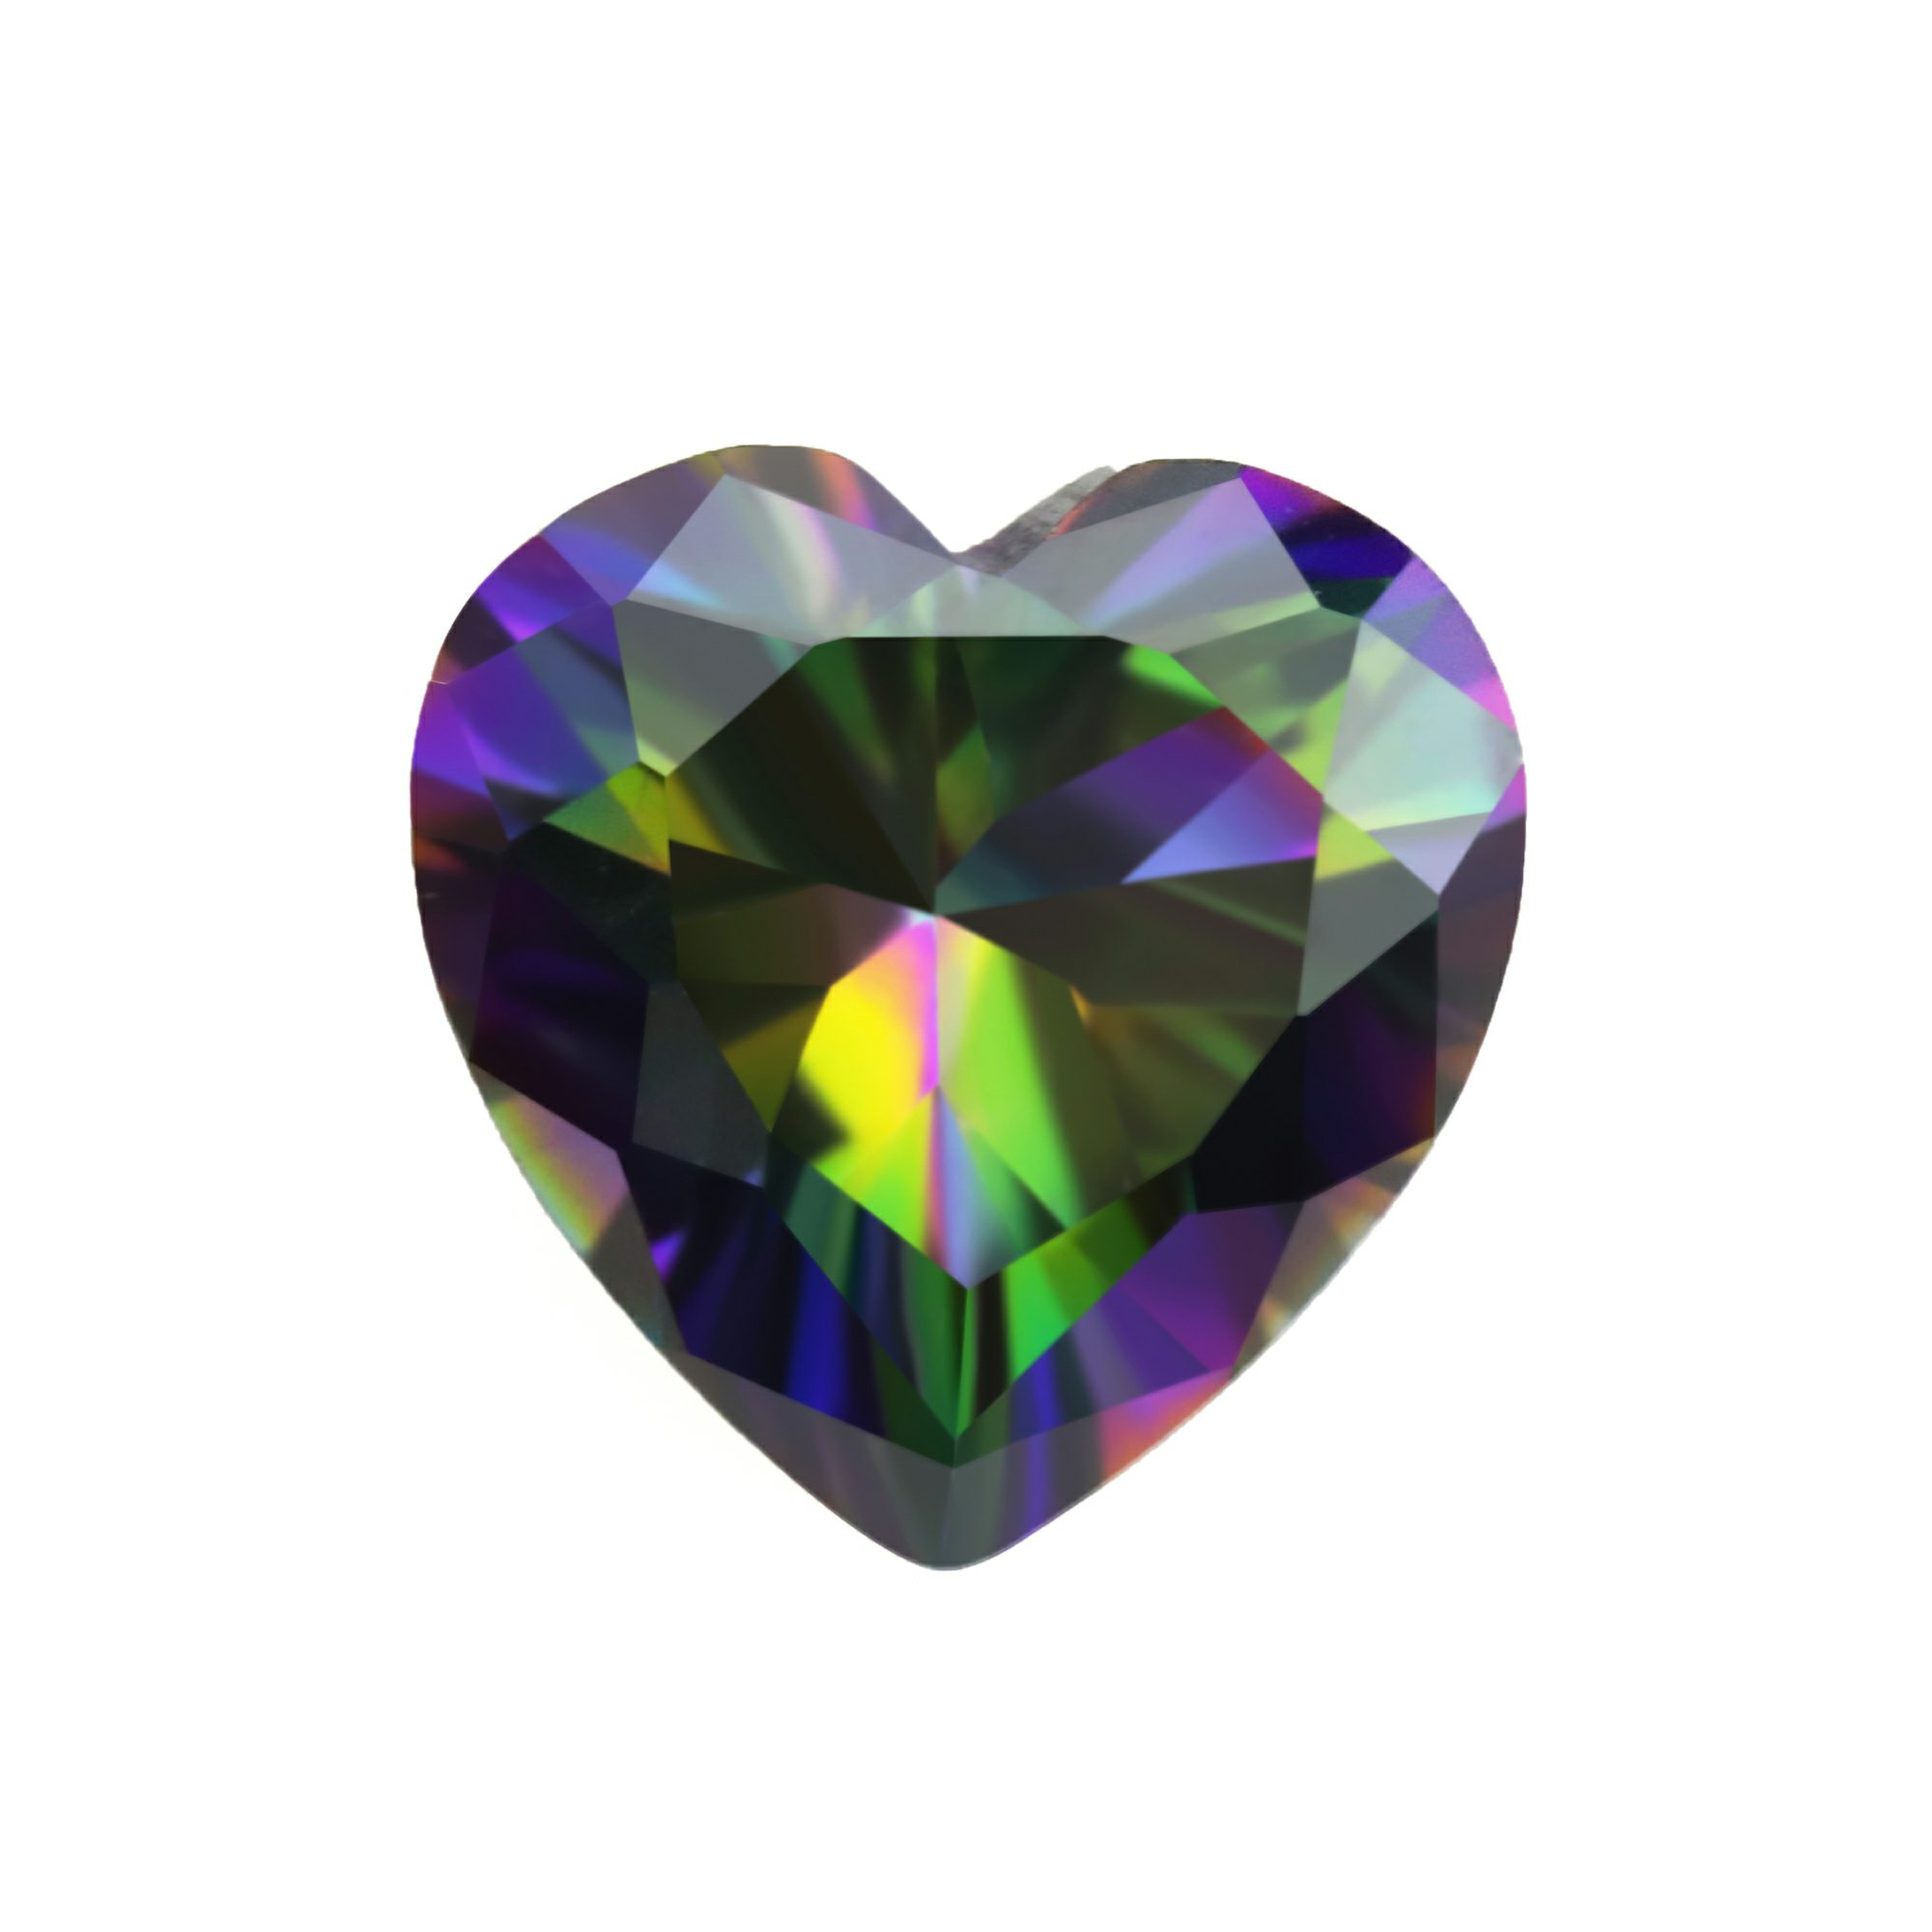 5Pcs January February April June August October November Birthstone Heart Faceted Cubic Zirconia CZ Stone DIY Loose Stone Supplies 4130020-1 - Click Image to Close